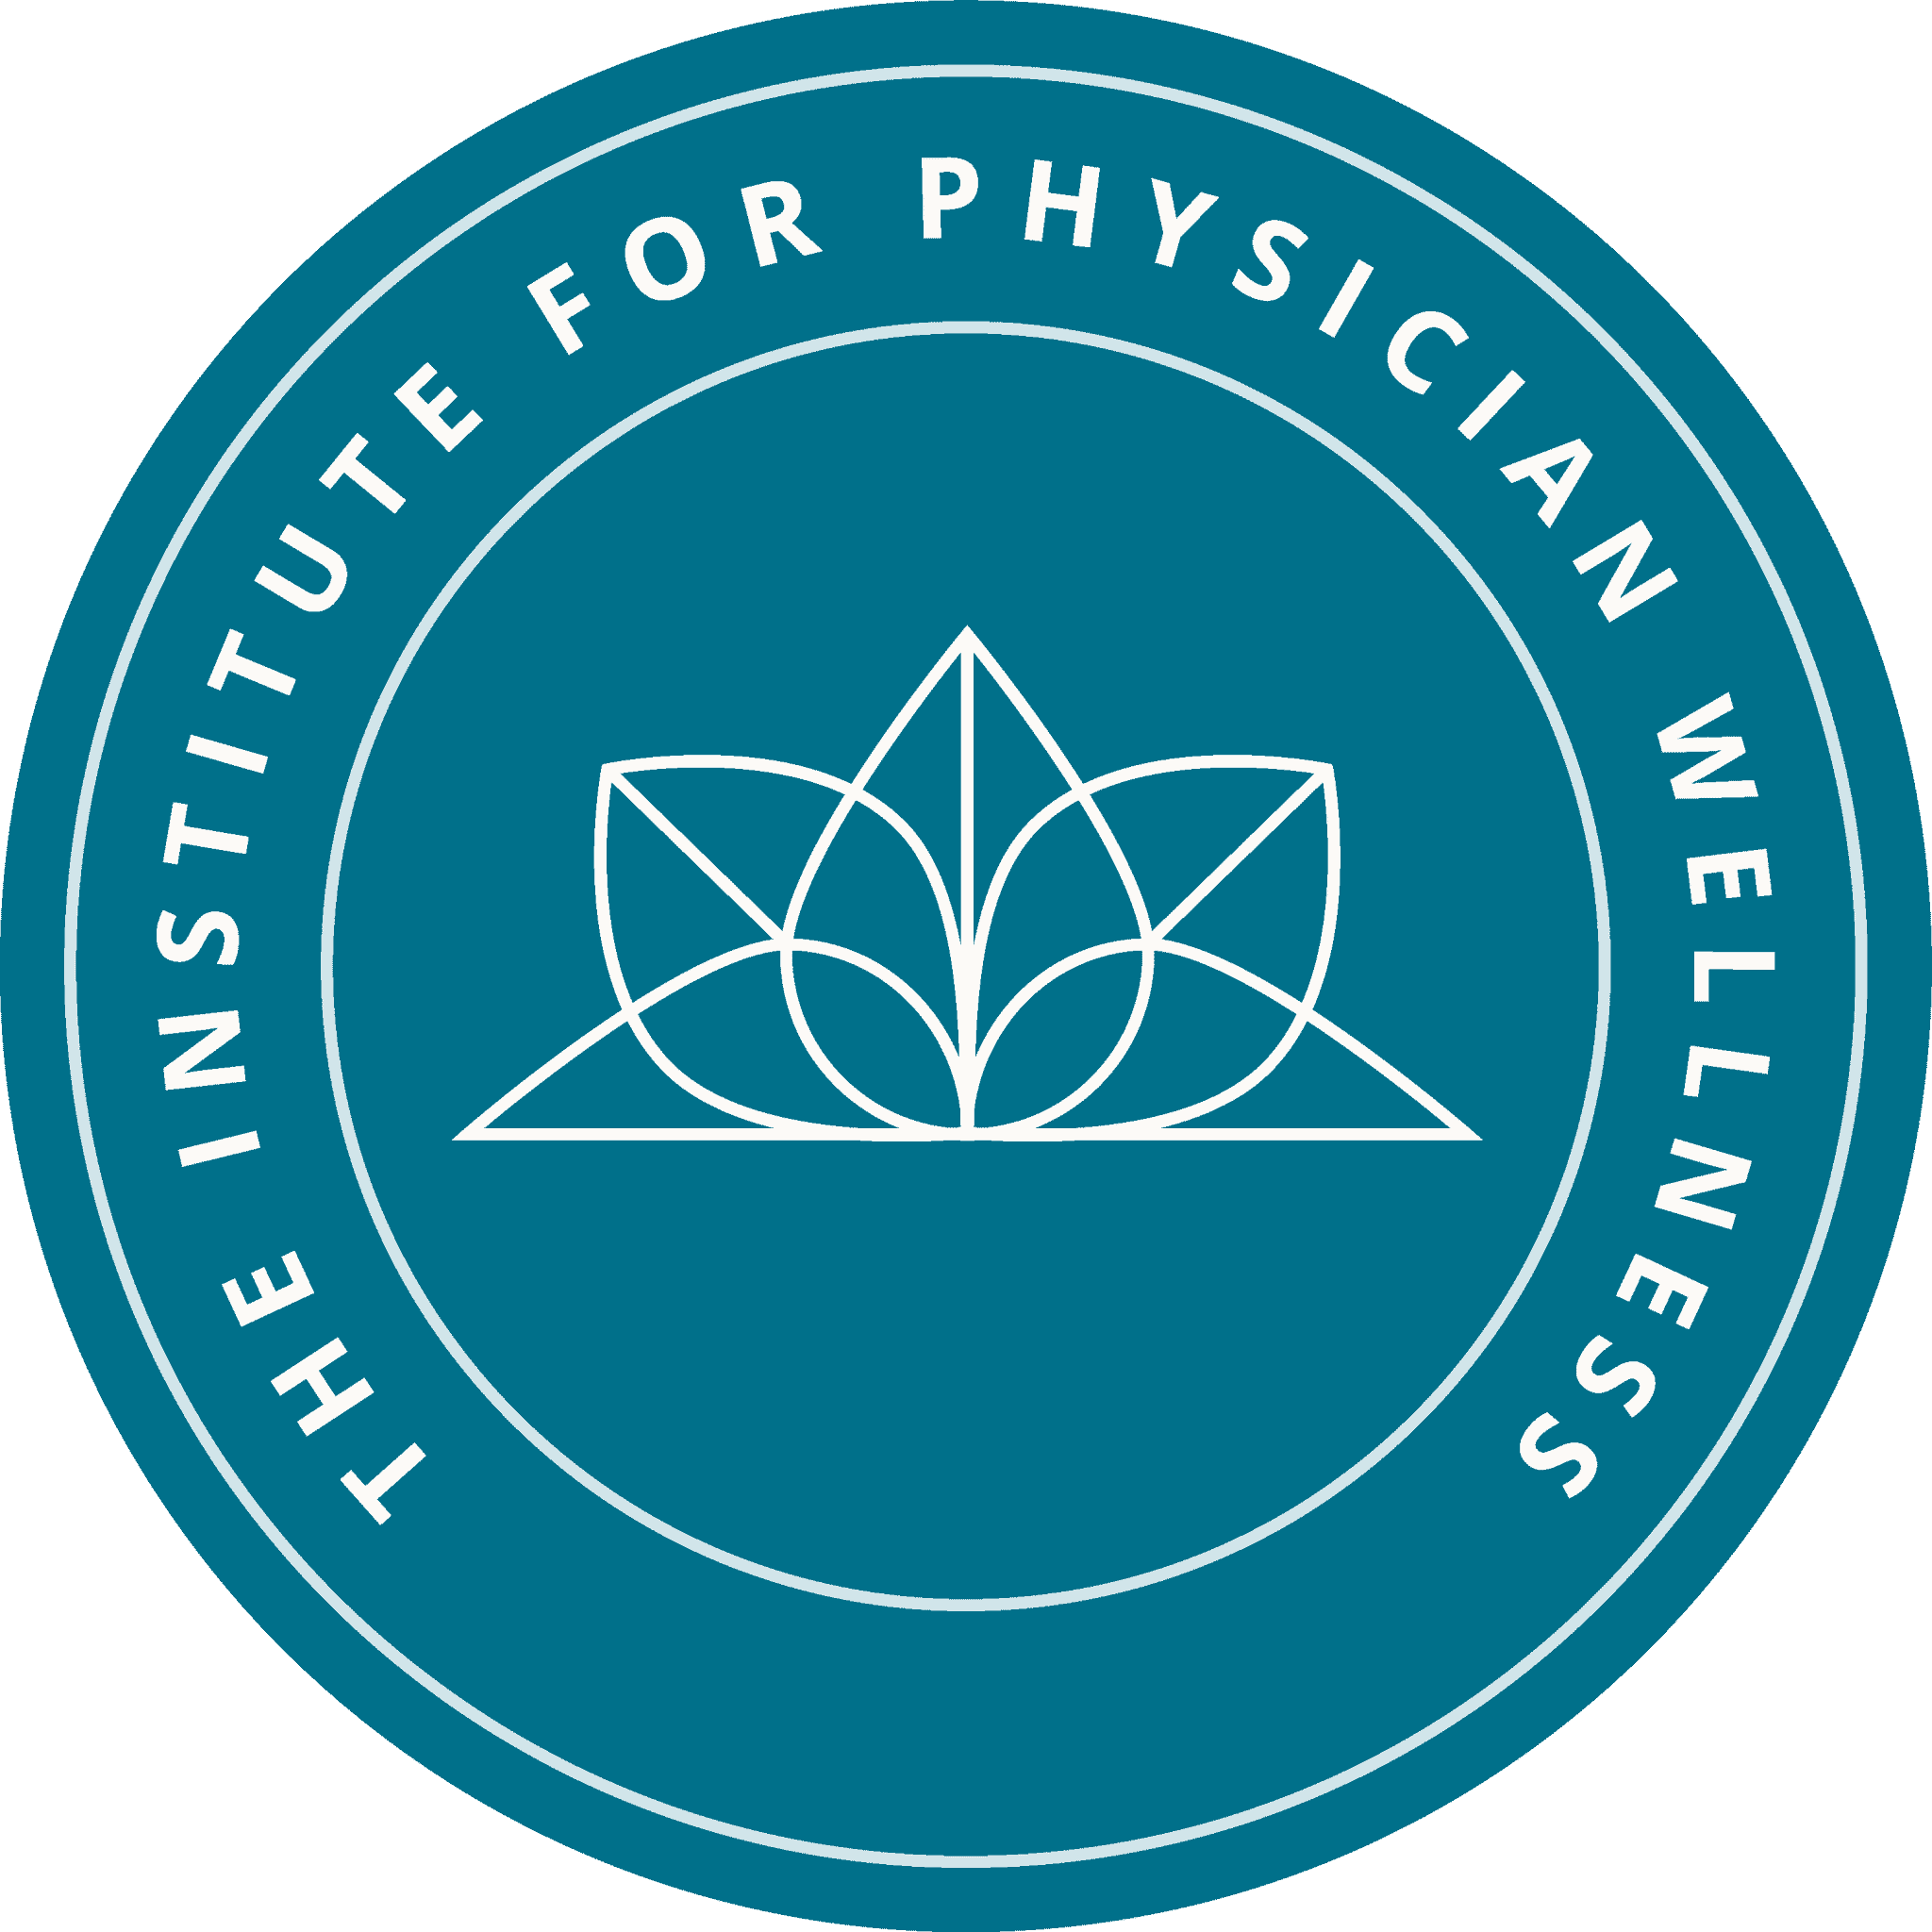 The Institute for Physician Wellness